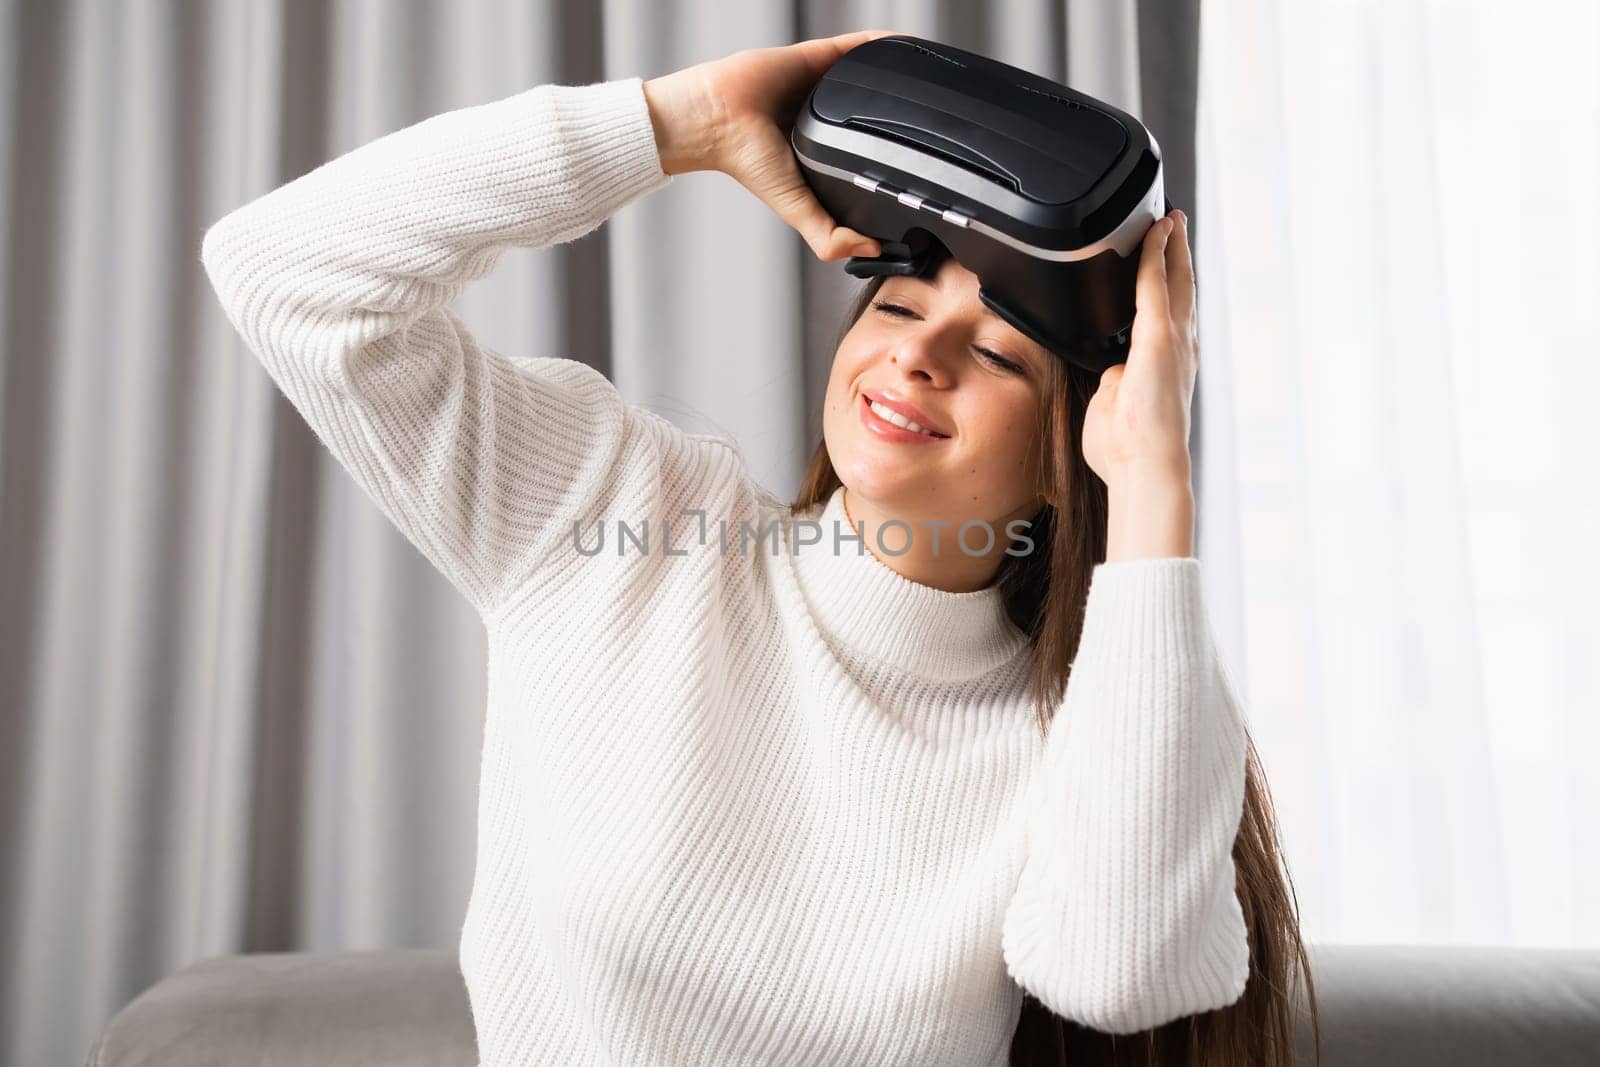 Portrait of a smiling woman putting on VR goggles for playing games in cyber space by vladimka